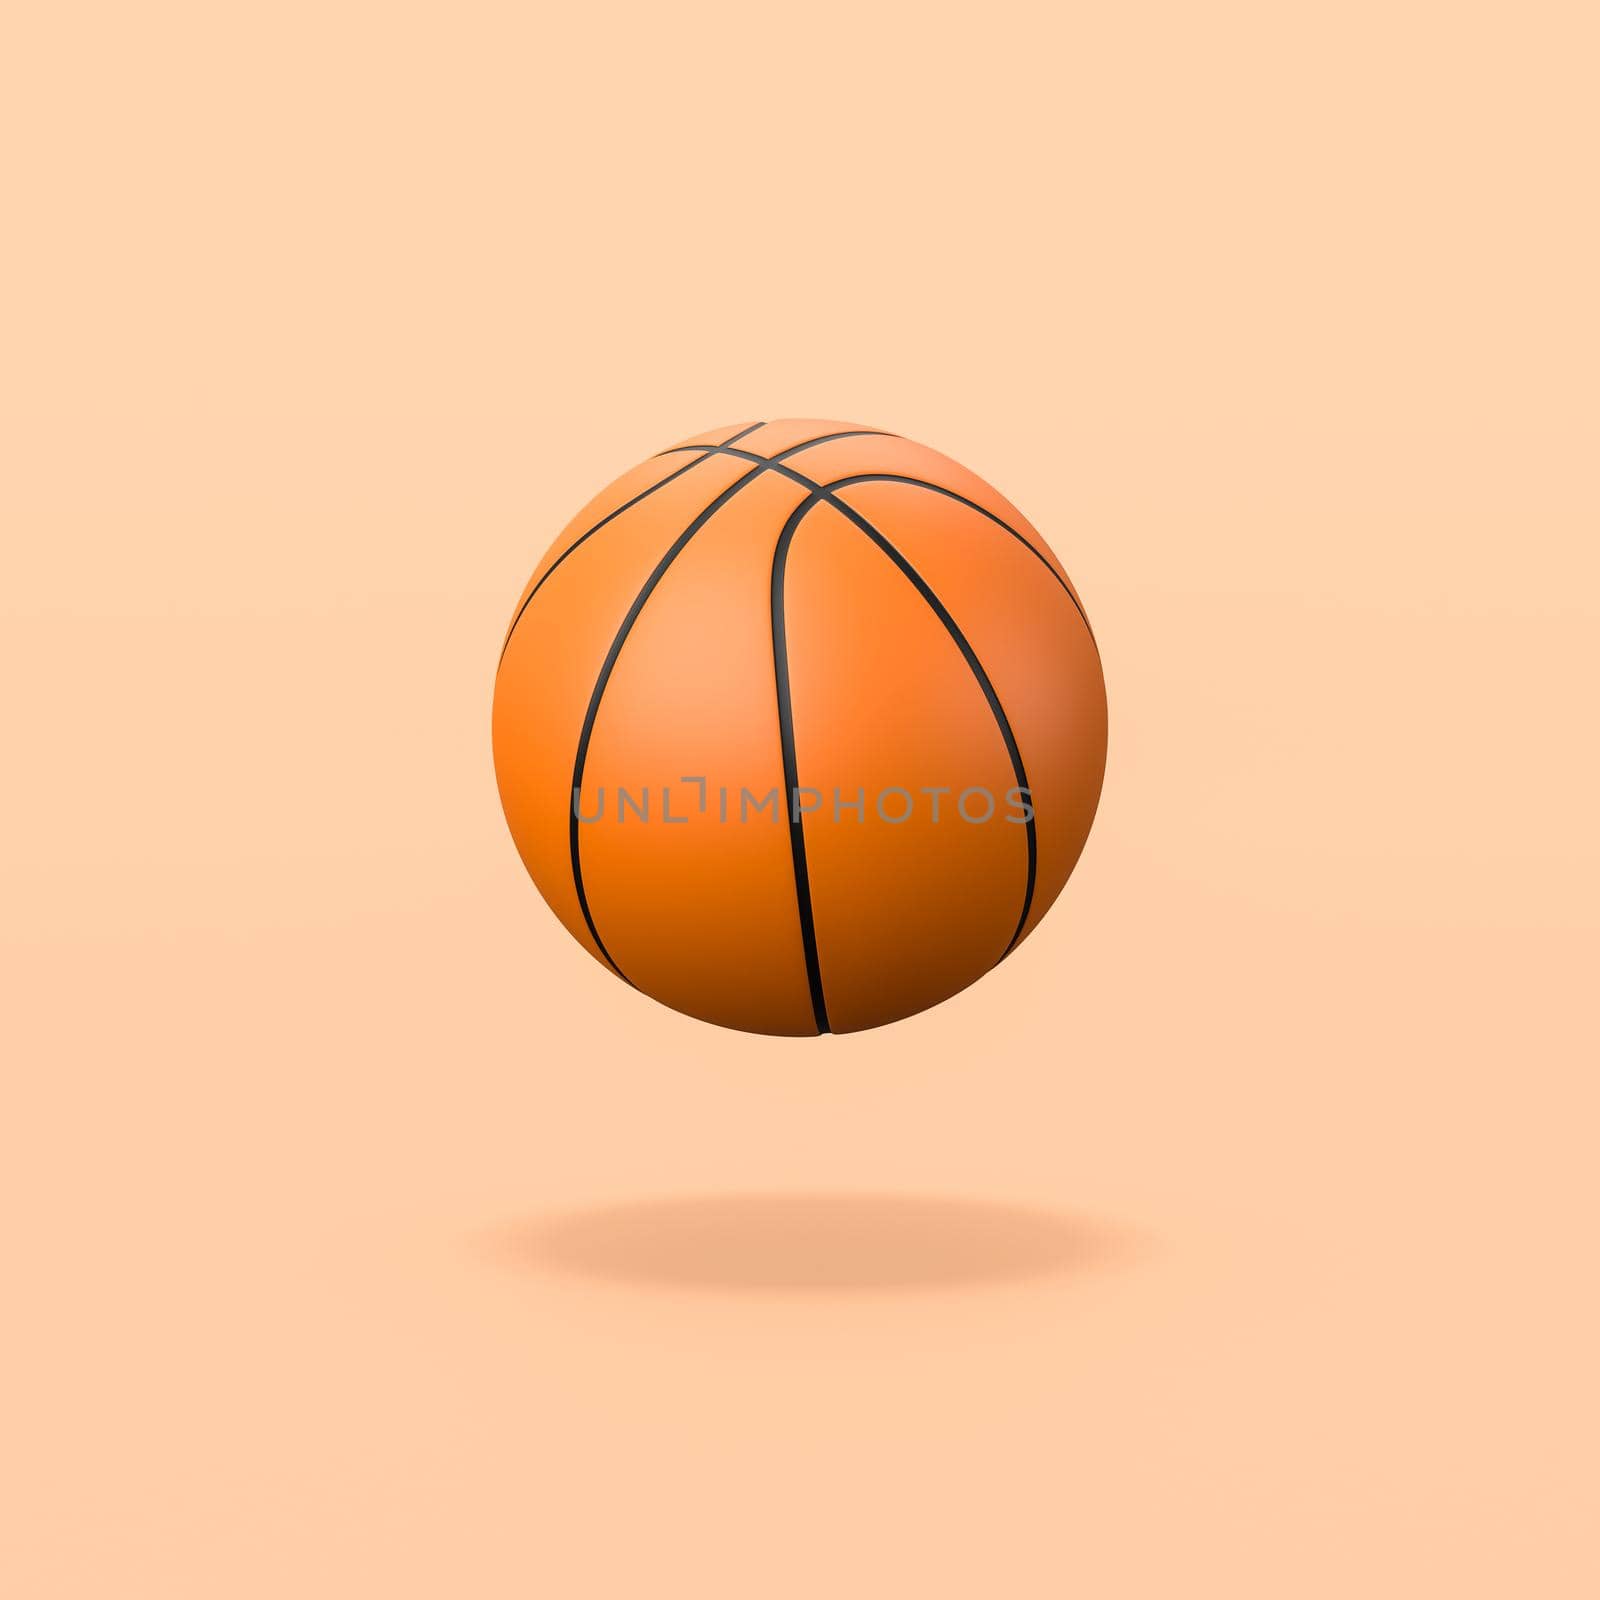 Basketball Ball Isolated on Flat Orange Background with Shadow 3D Illustration